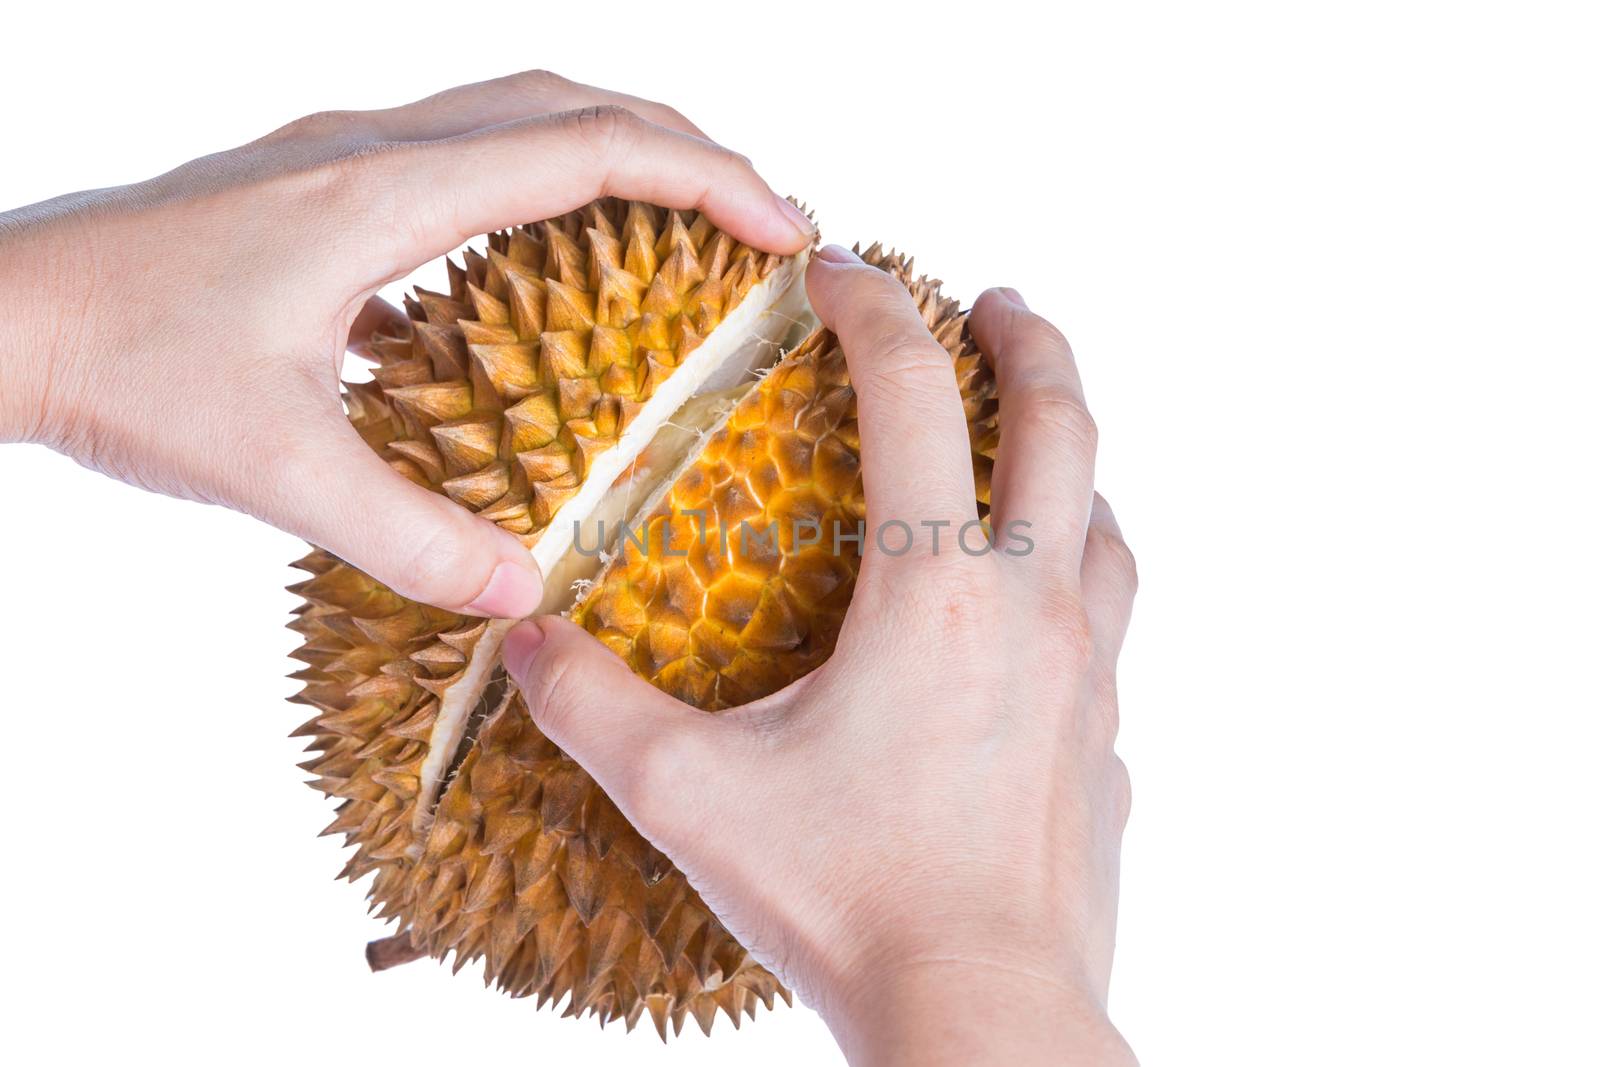 The use hand peeled durian spiny with its ripe and soft delicious flesh. Durian is king of fruits, tropical durian. Durian is formidable thorn-covered husk. Isolated on white background.